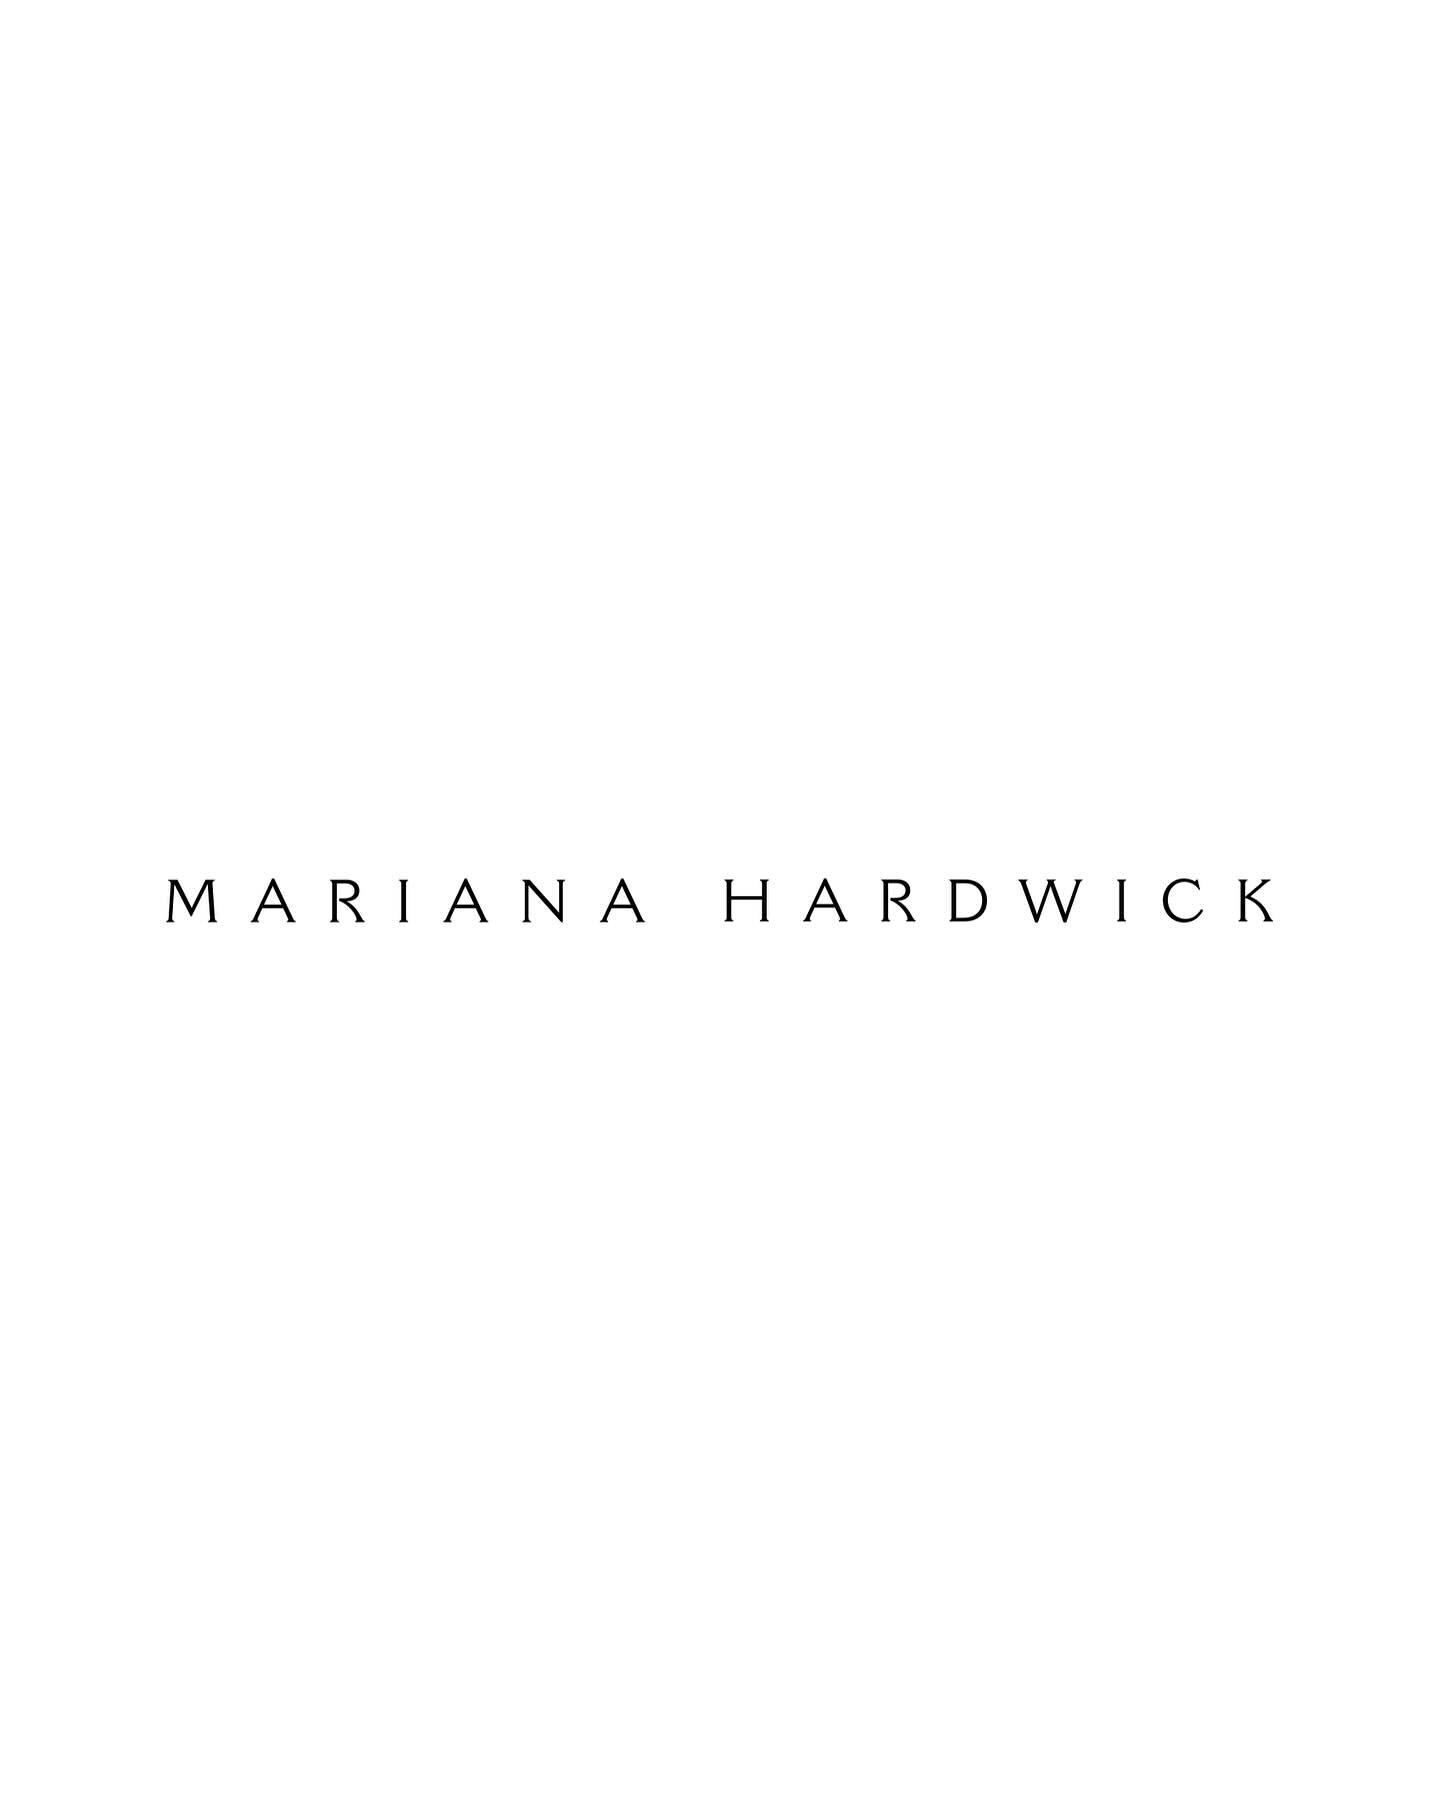 UK BRIDES 🇬🇧 DROP EVERYTHING!

We can finally share our big secret! We have AMAZING news and we are so excited to share it with you all. 

For the first time, Mariana Hardwick will be available to UK brides. We are so proud to welcome the incredibl